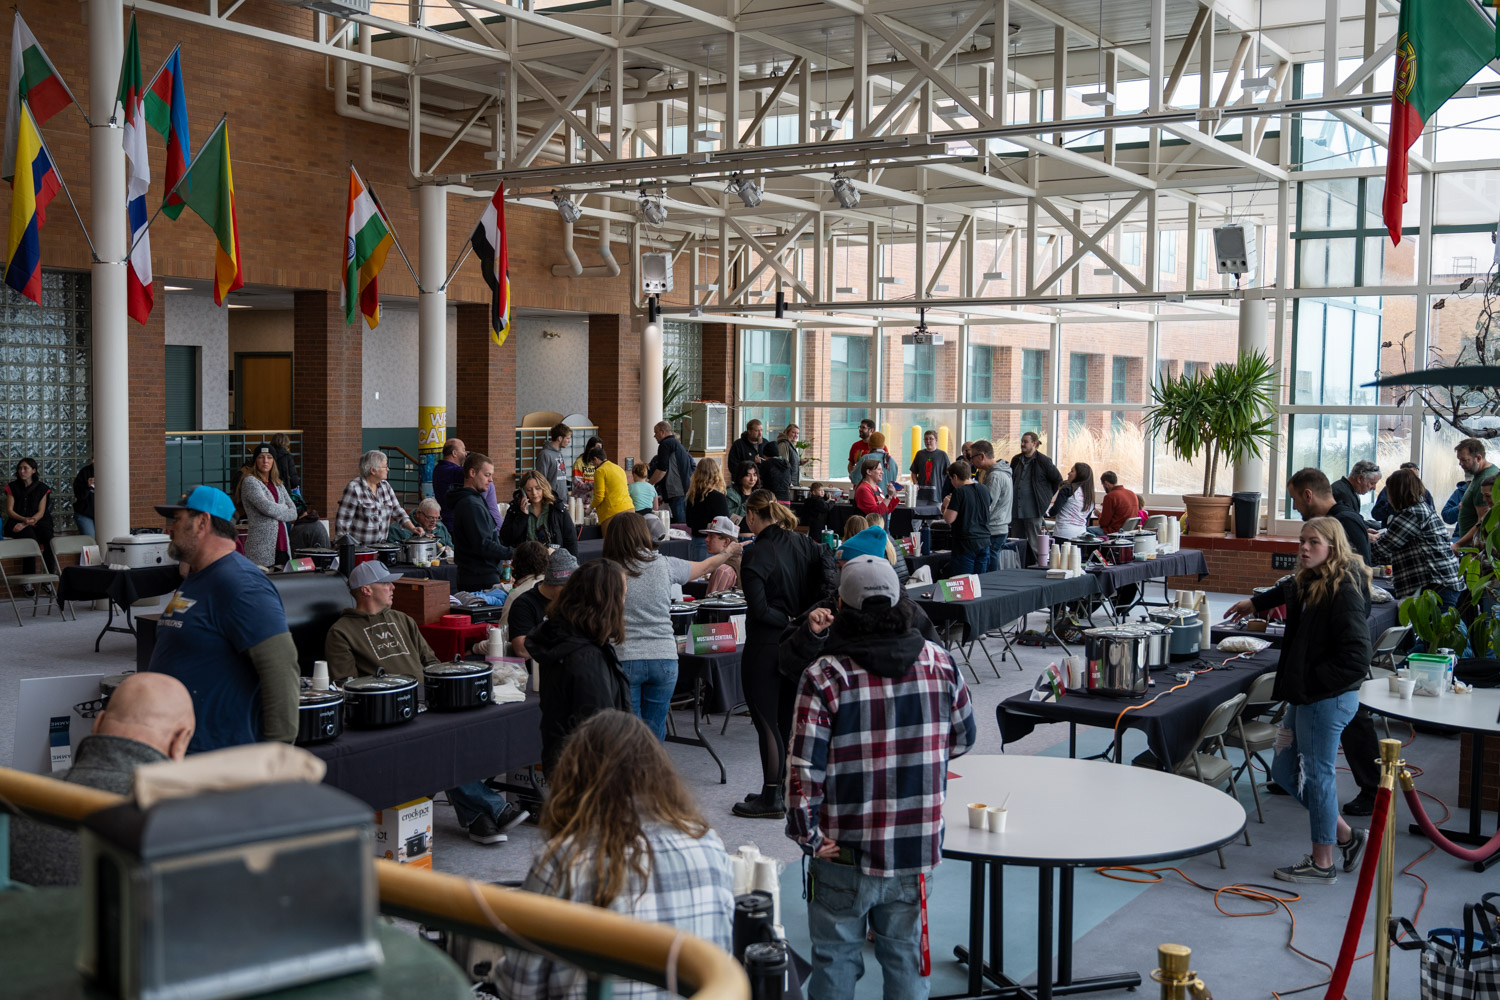 Crowd Forming in Atrium at Chili Cook-Off